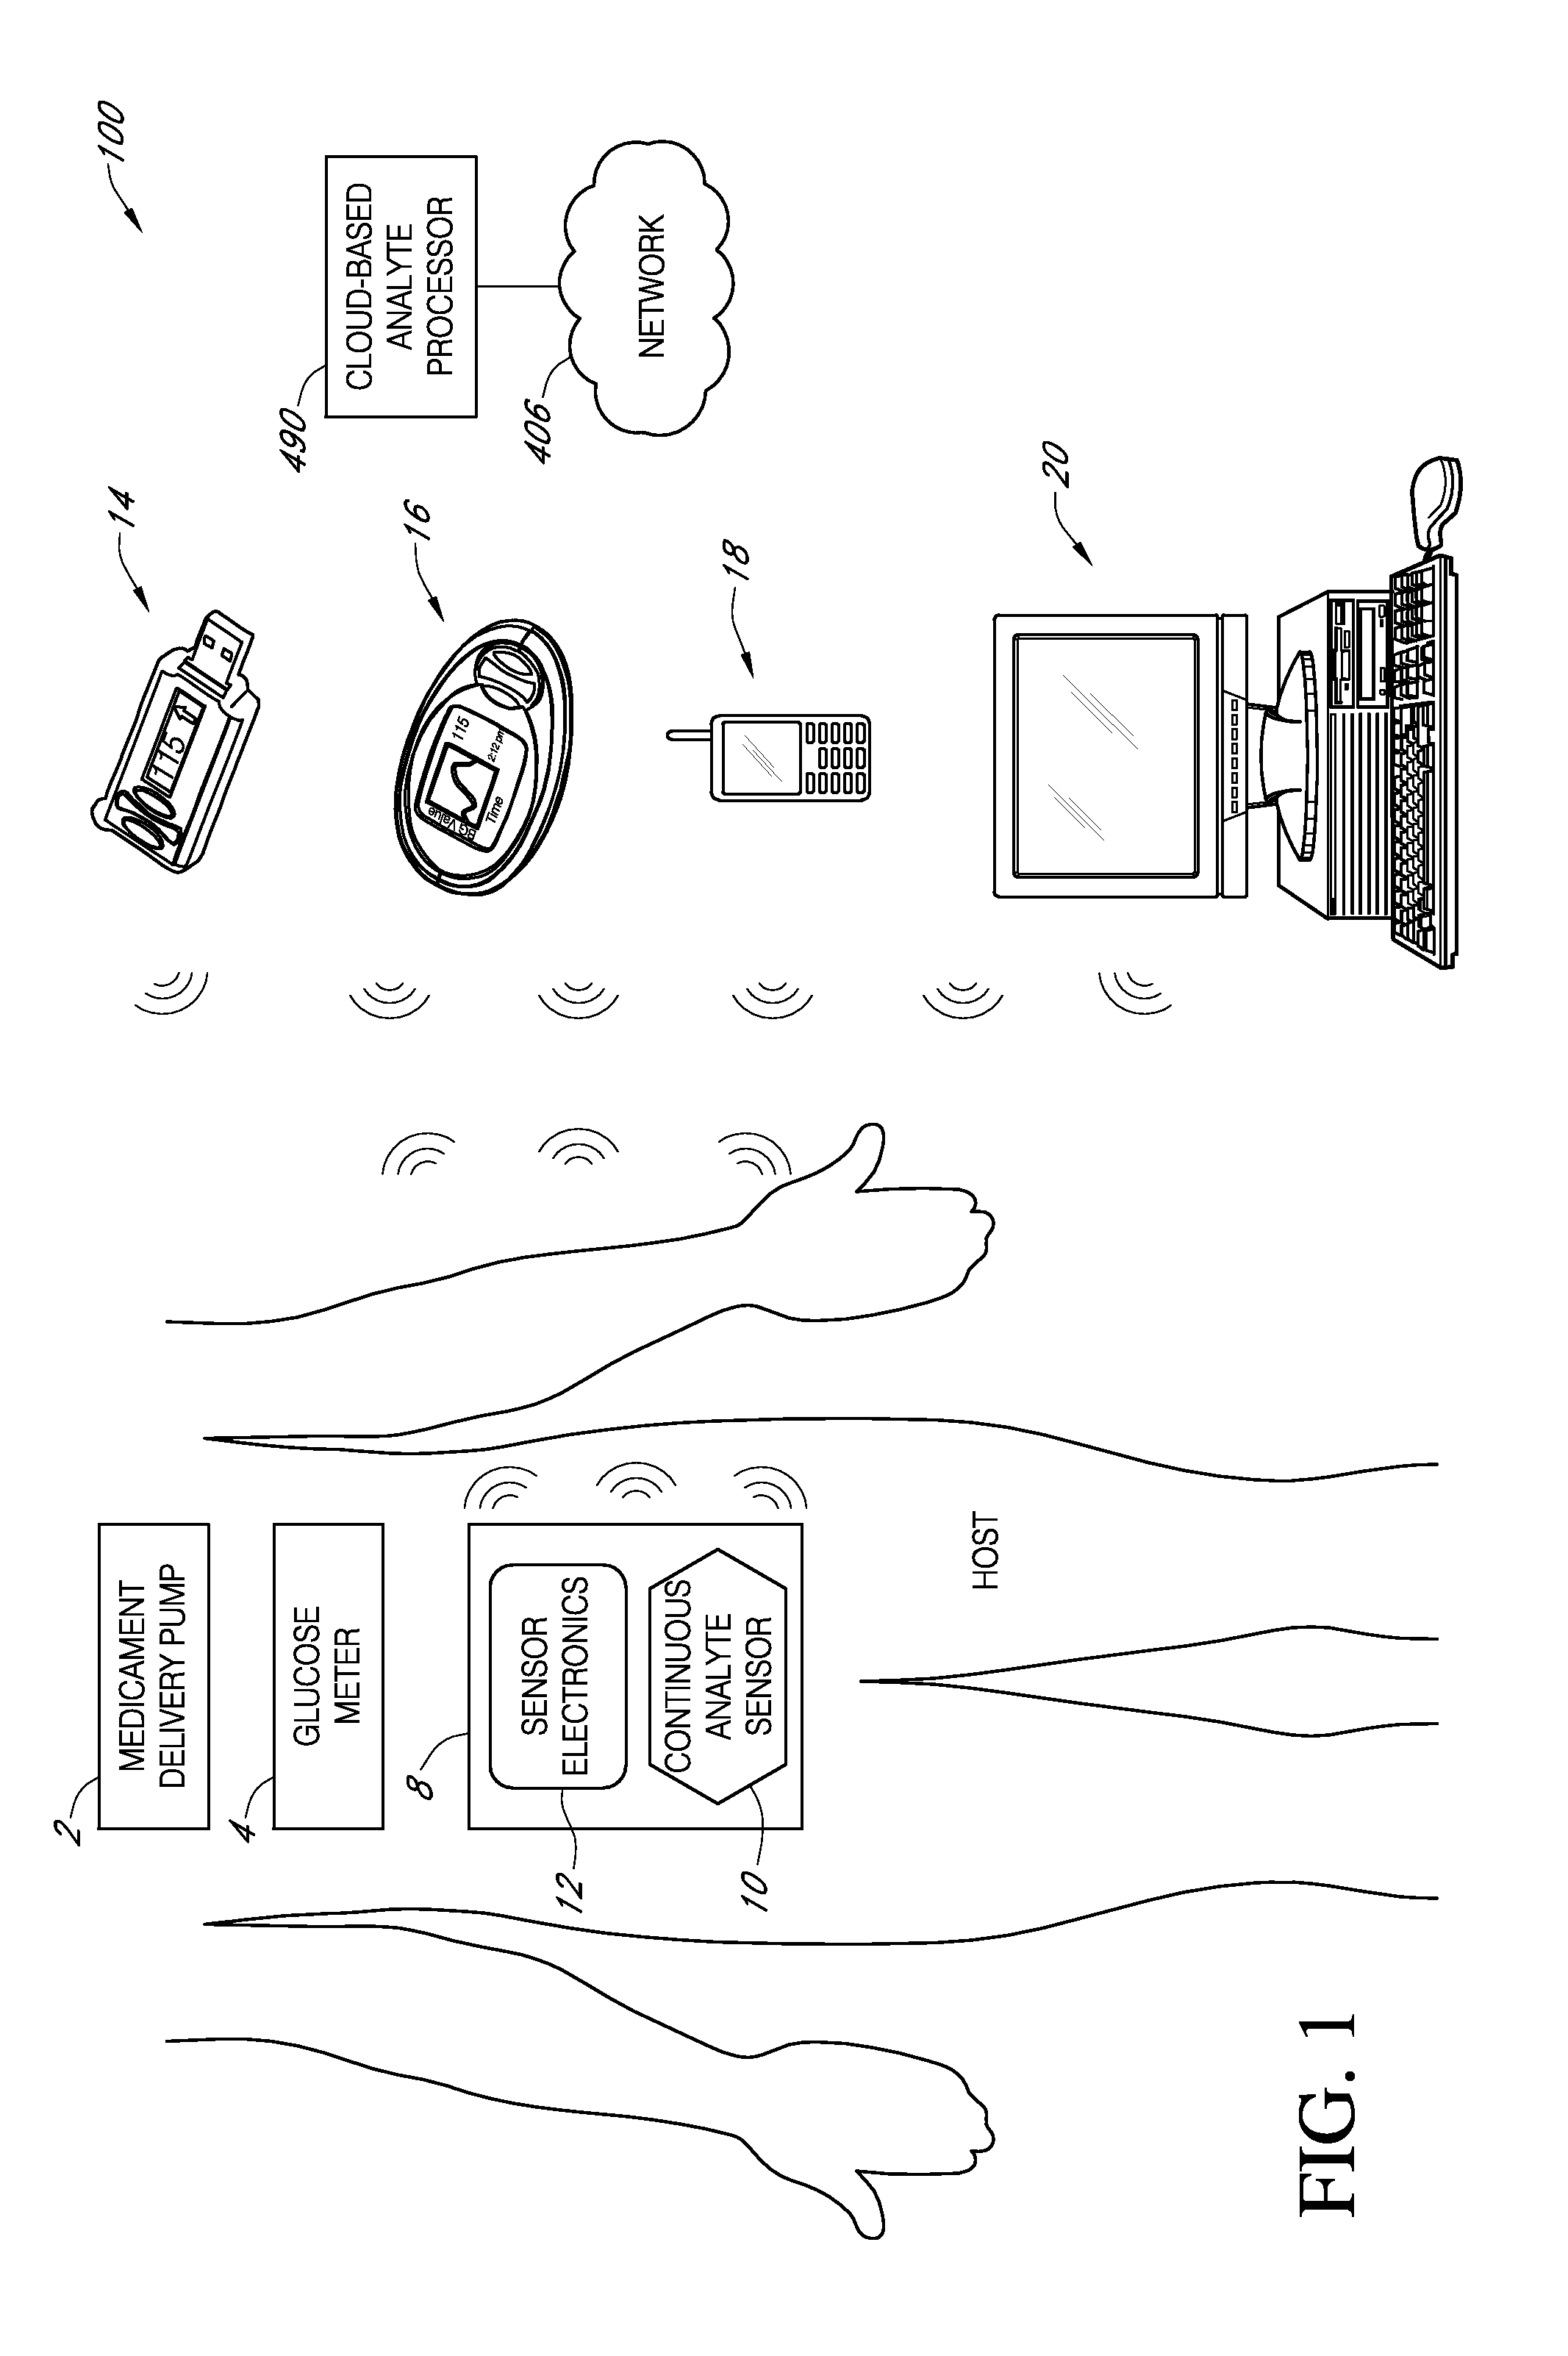 Systems and methods for providing sensitive and specific alarms